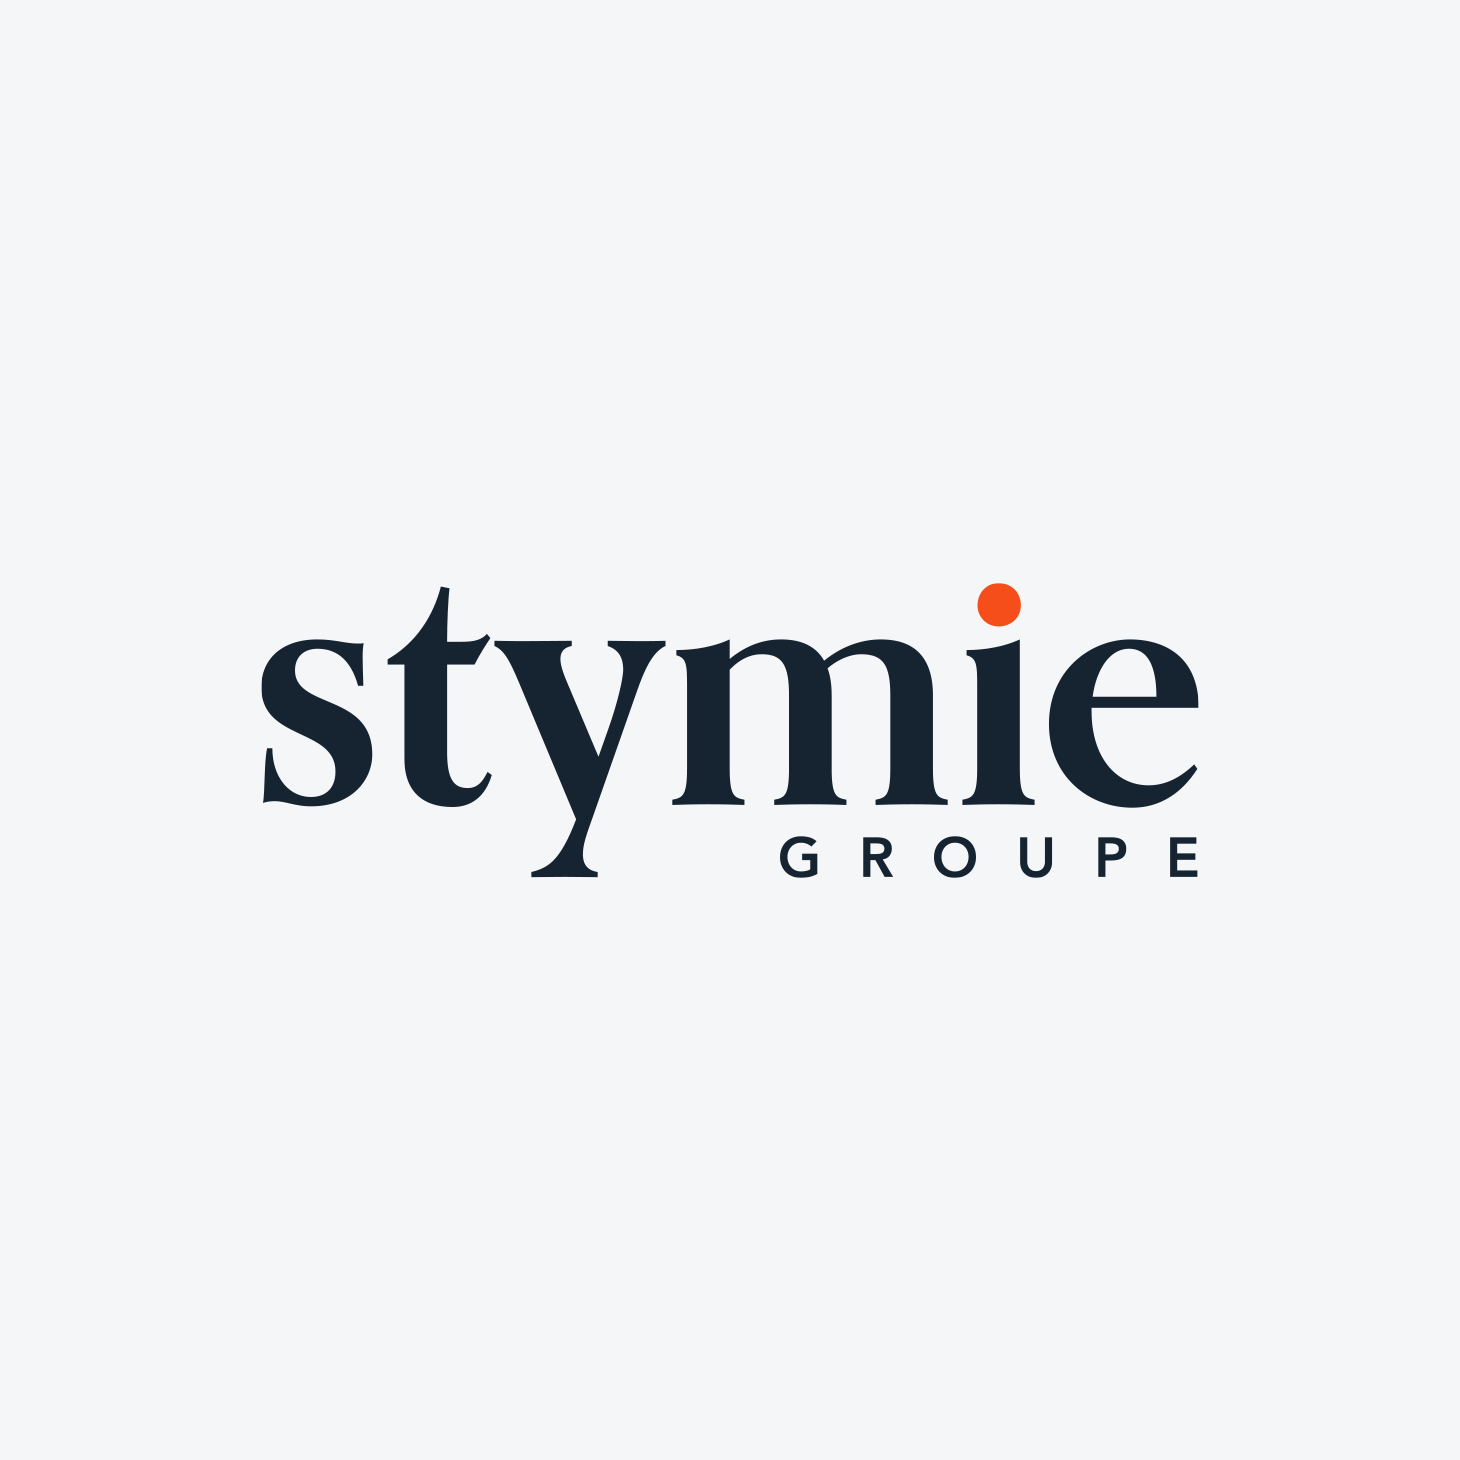 Logo design for Stymie Groupe